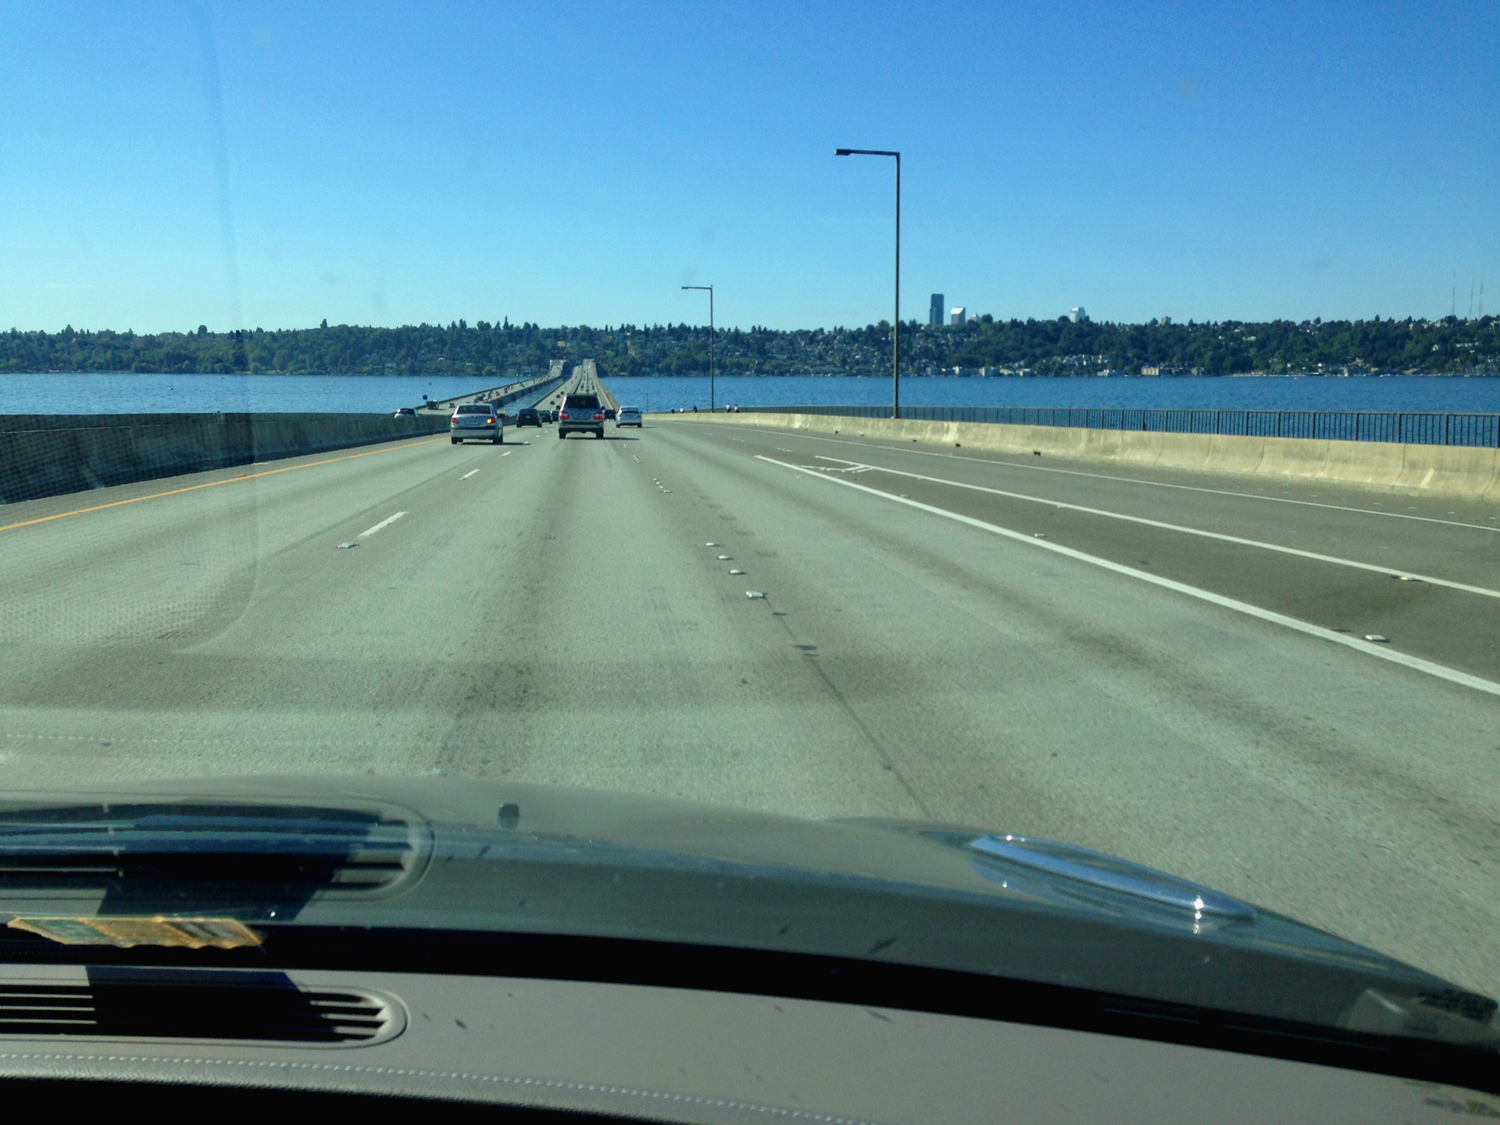 Coming into Seattle across the floating bridge